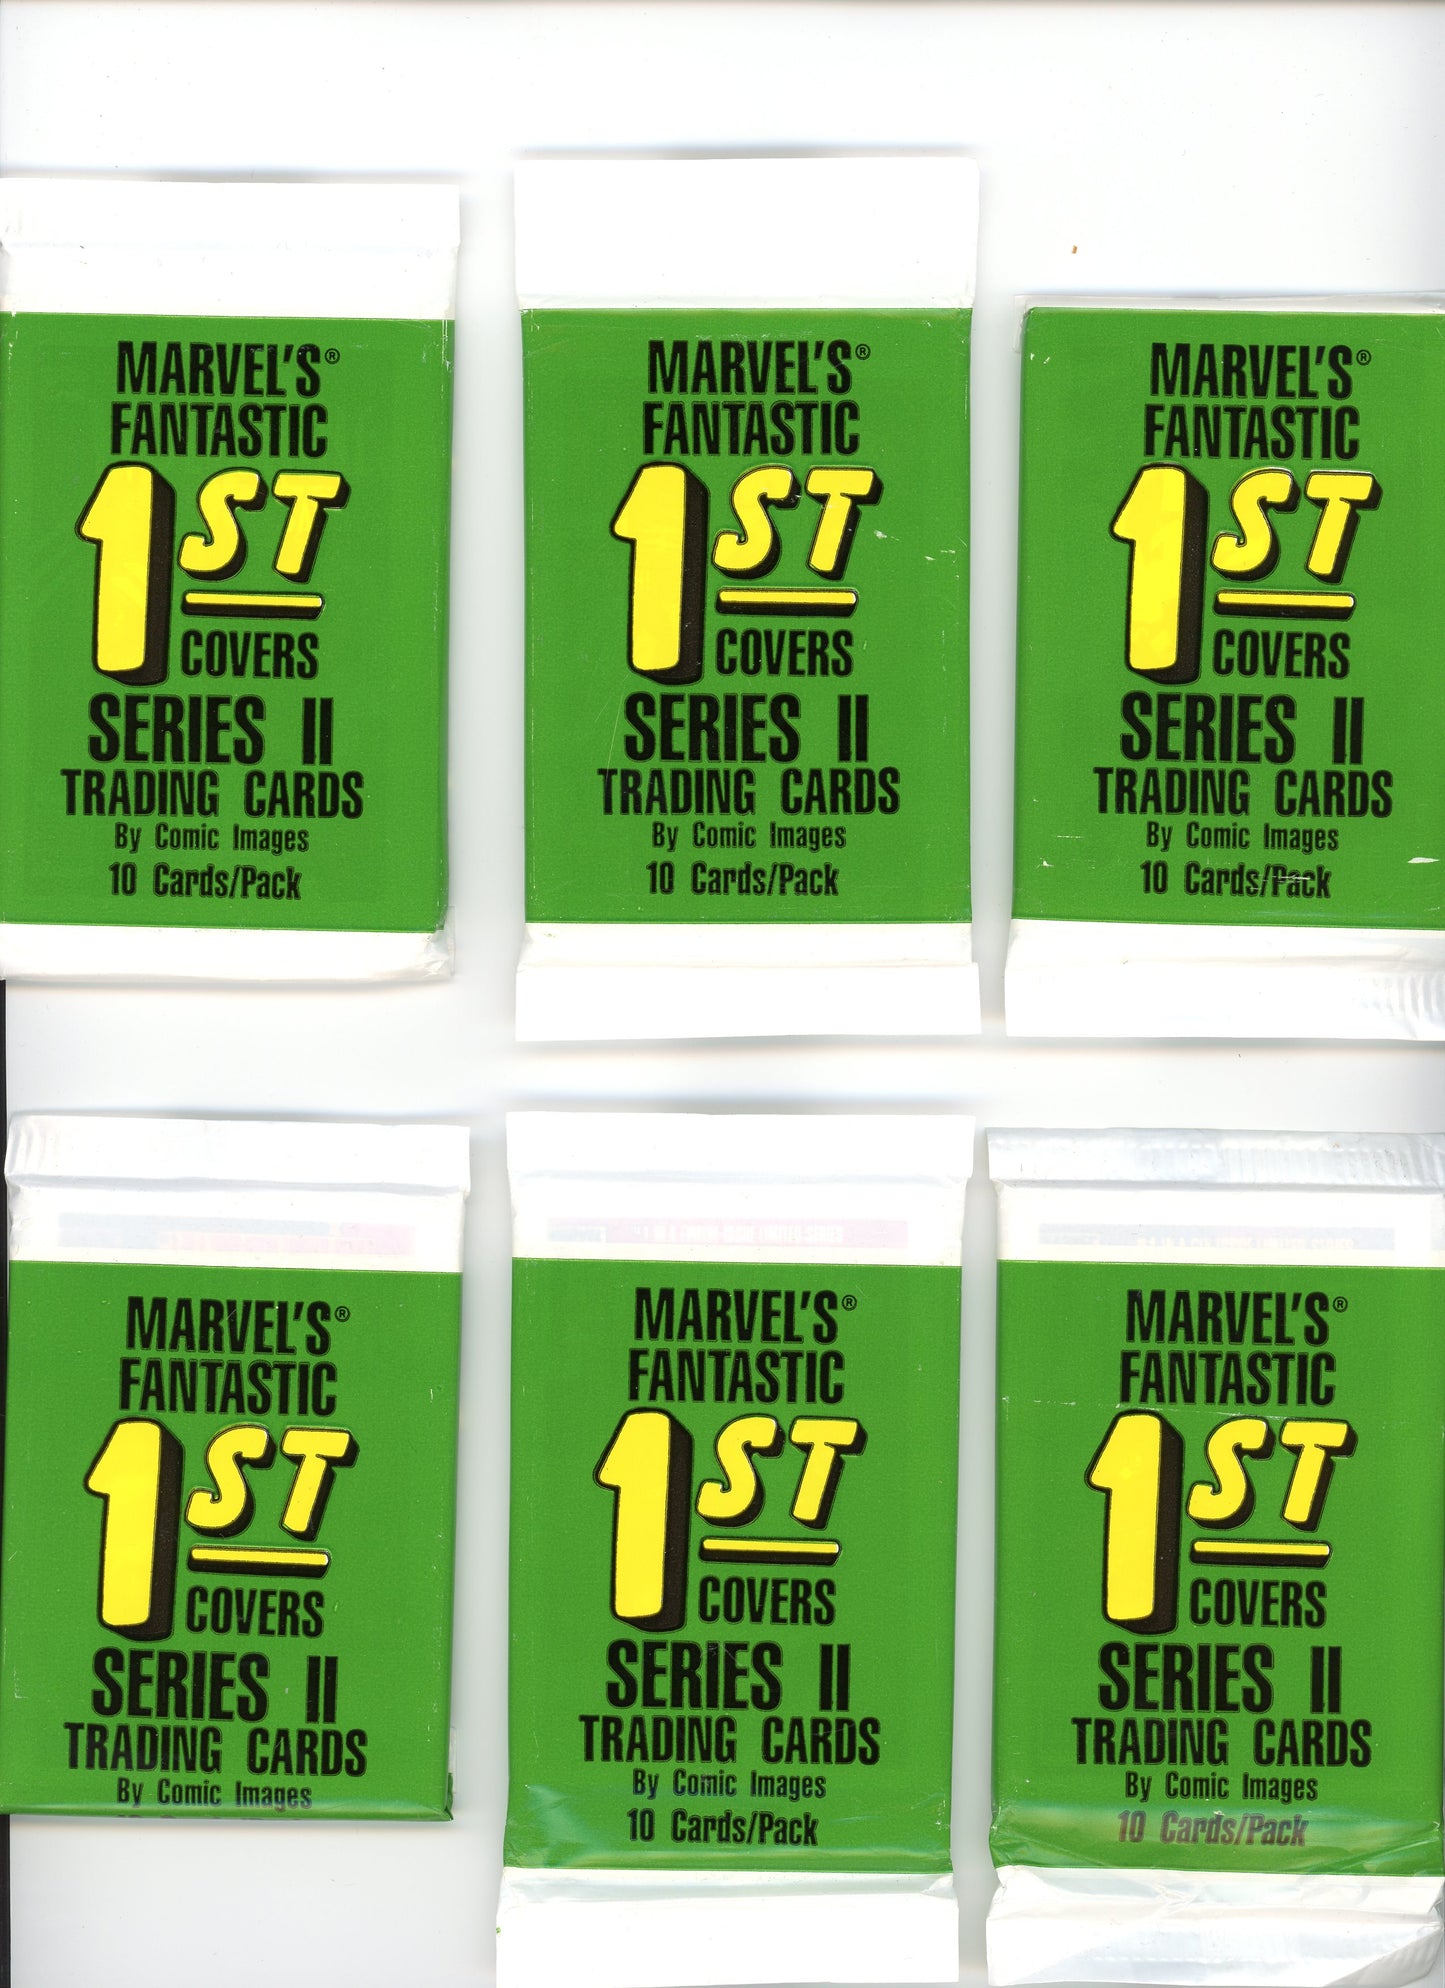 Marvel's Fantastic 1st Covers Series II Trading Cards (6 Packs)